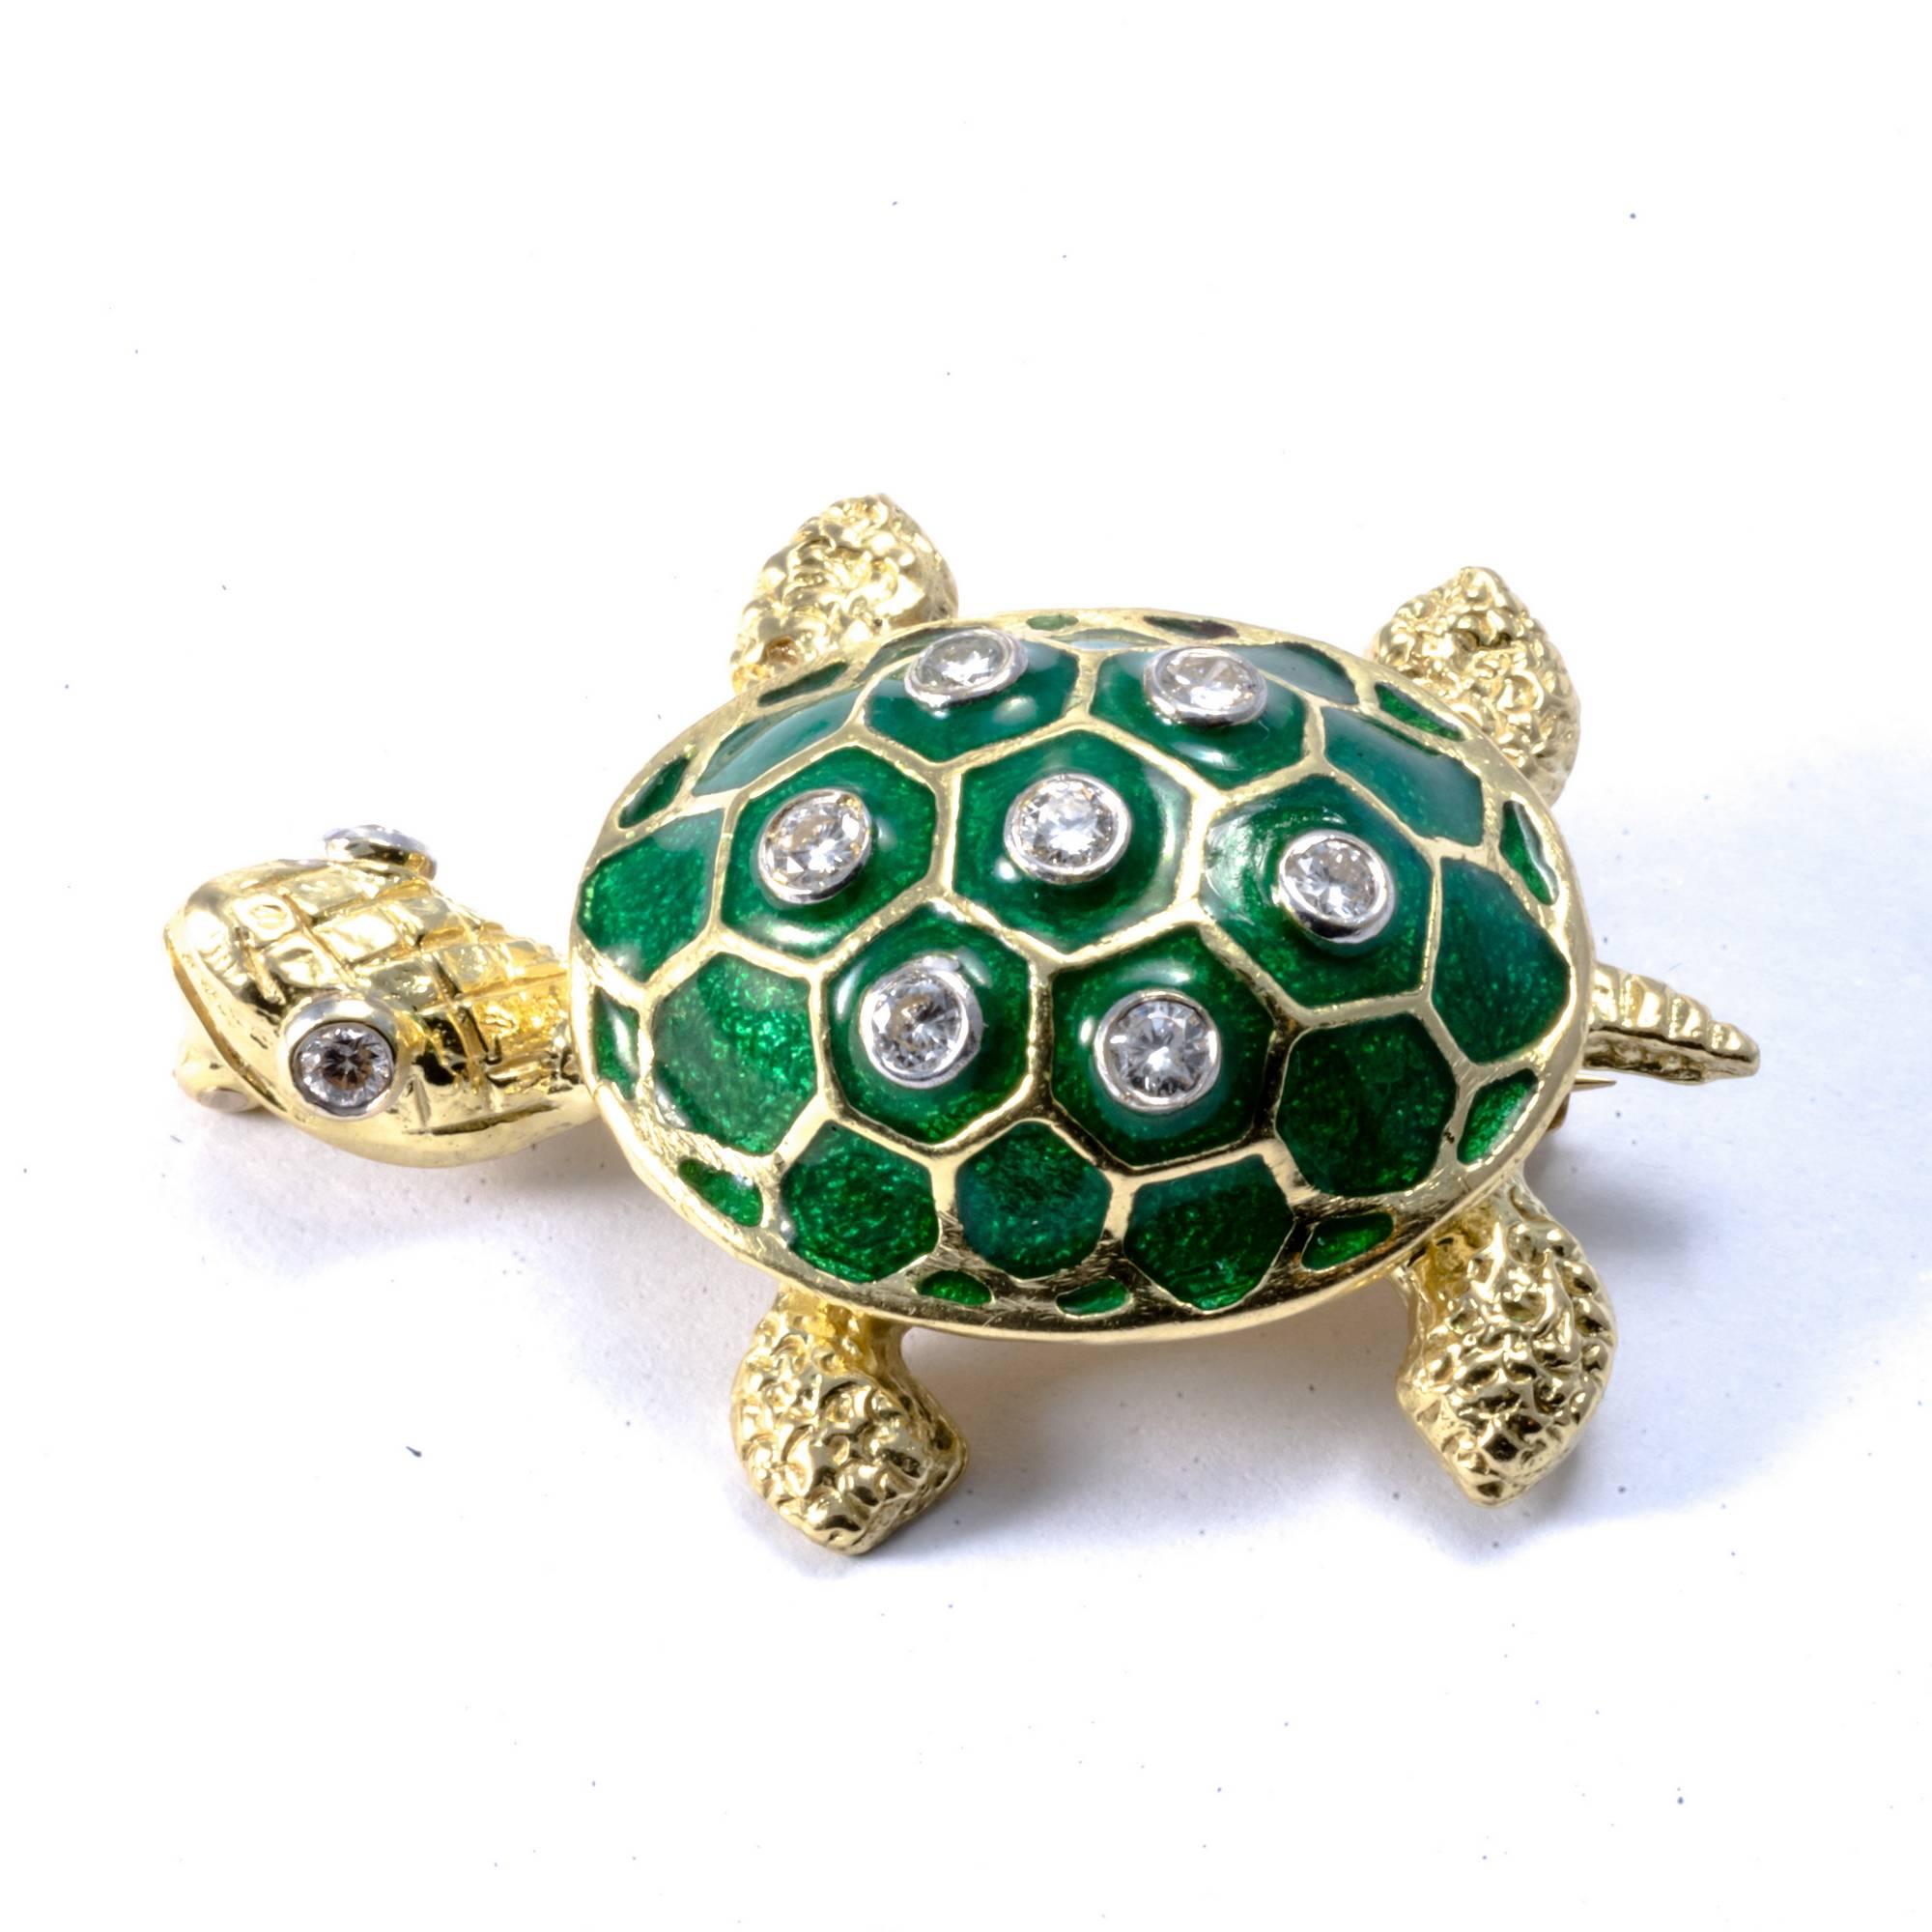 The turtle is a positive symbol in many different cultures: it is a greeting of longevity and endurance, and it is said to represent and encourage the finding of the inner wisdom. That's why  this yellow gold tortoise is a perfect gift! This turtle